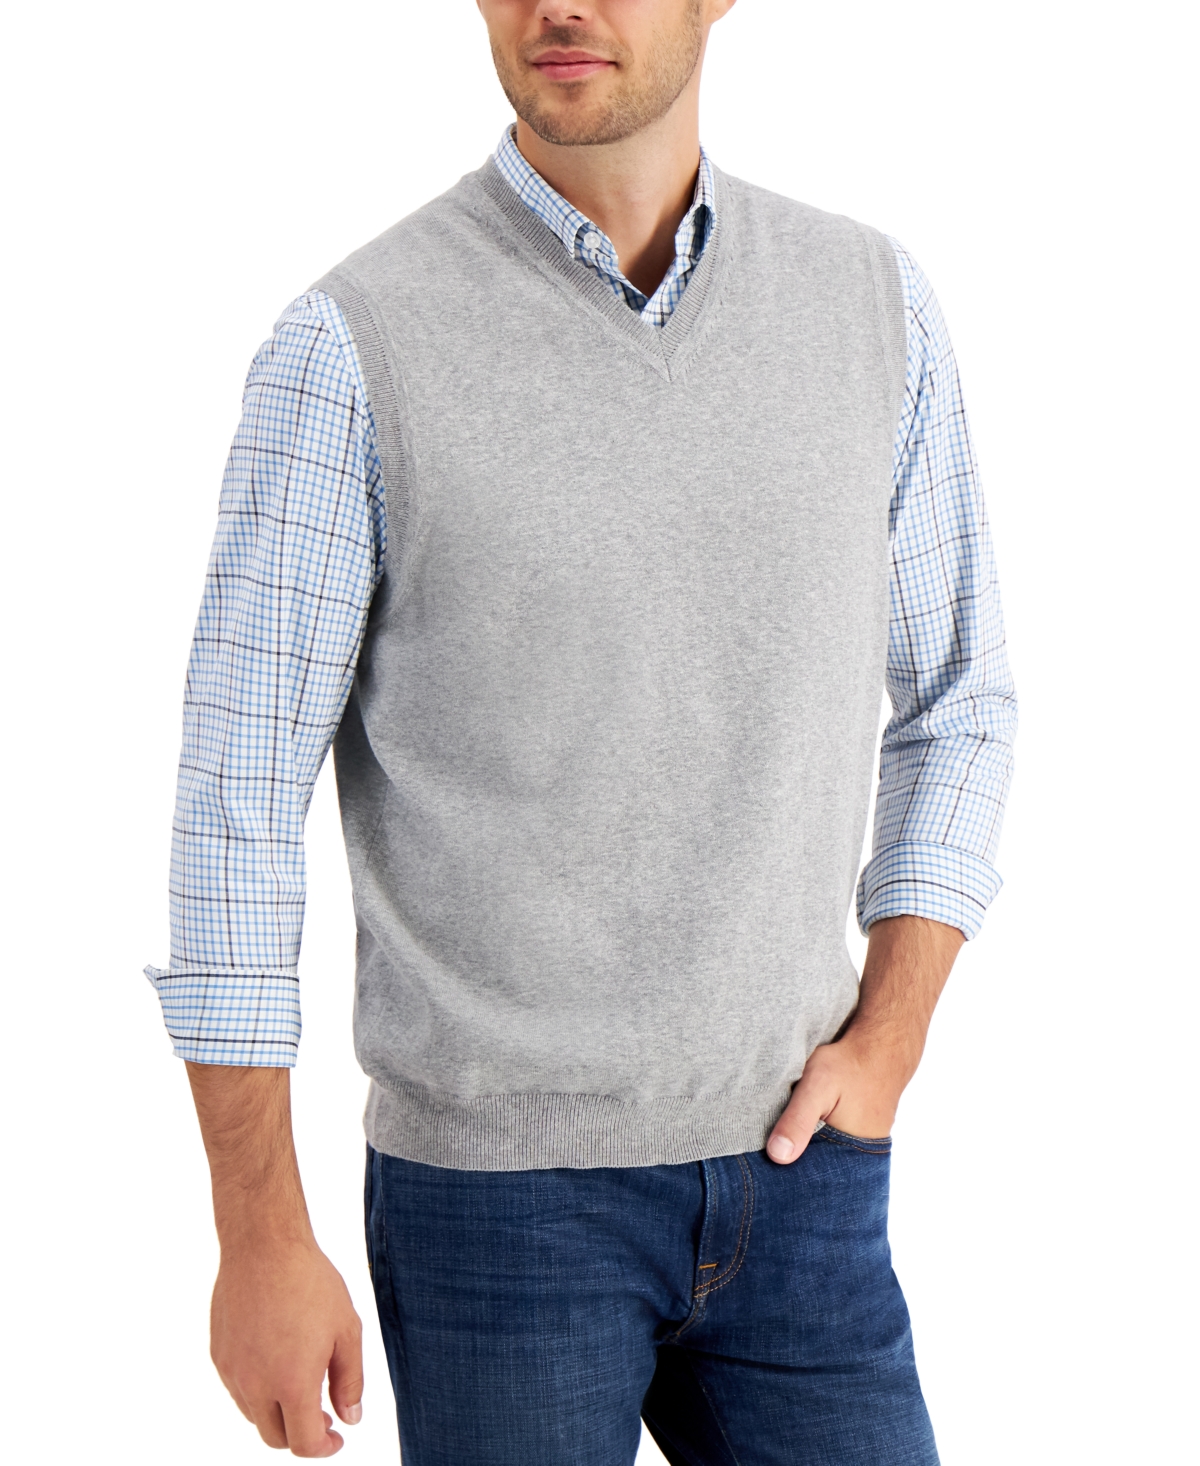 Men's Solid V-Neck Sweater Vest, Created for Macy's - Wild Ivy